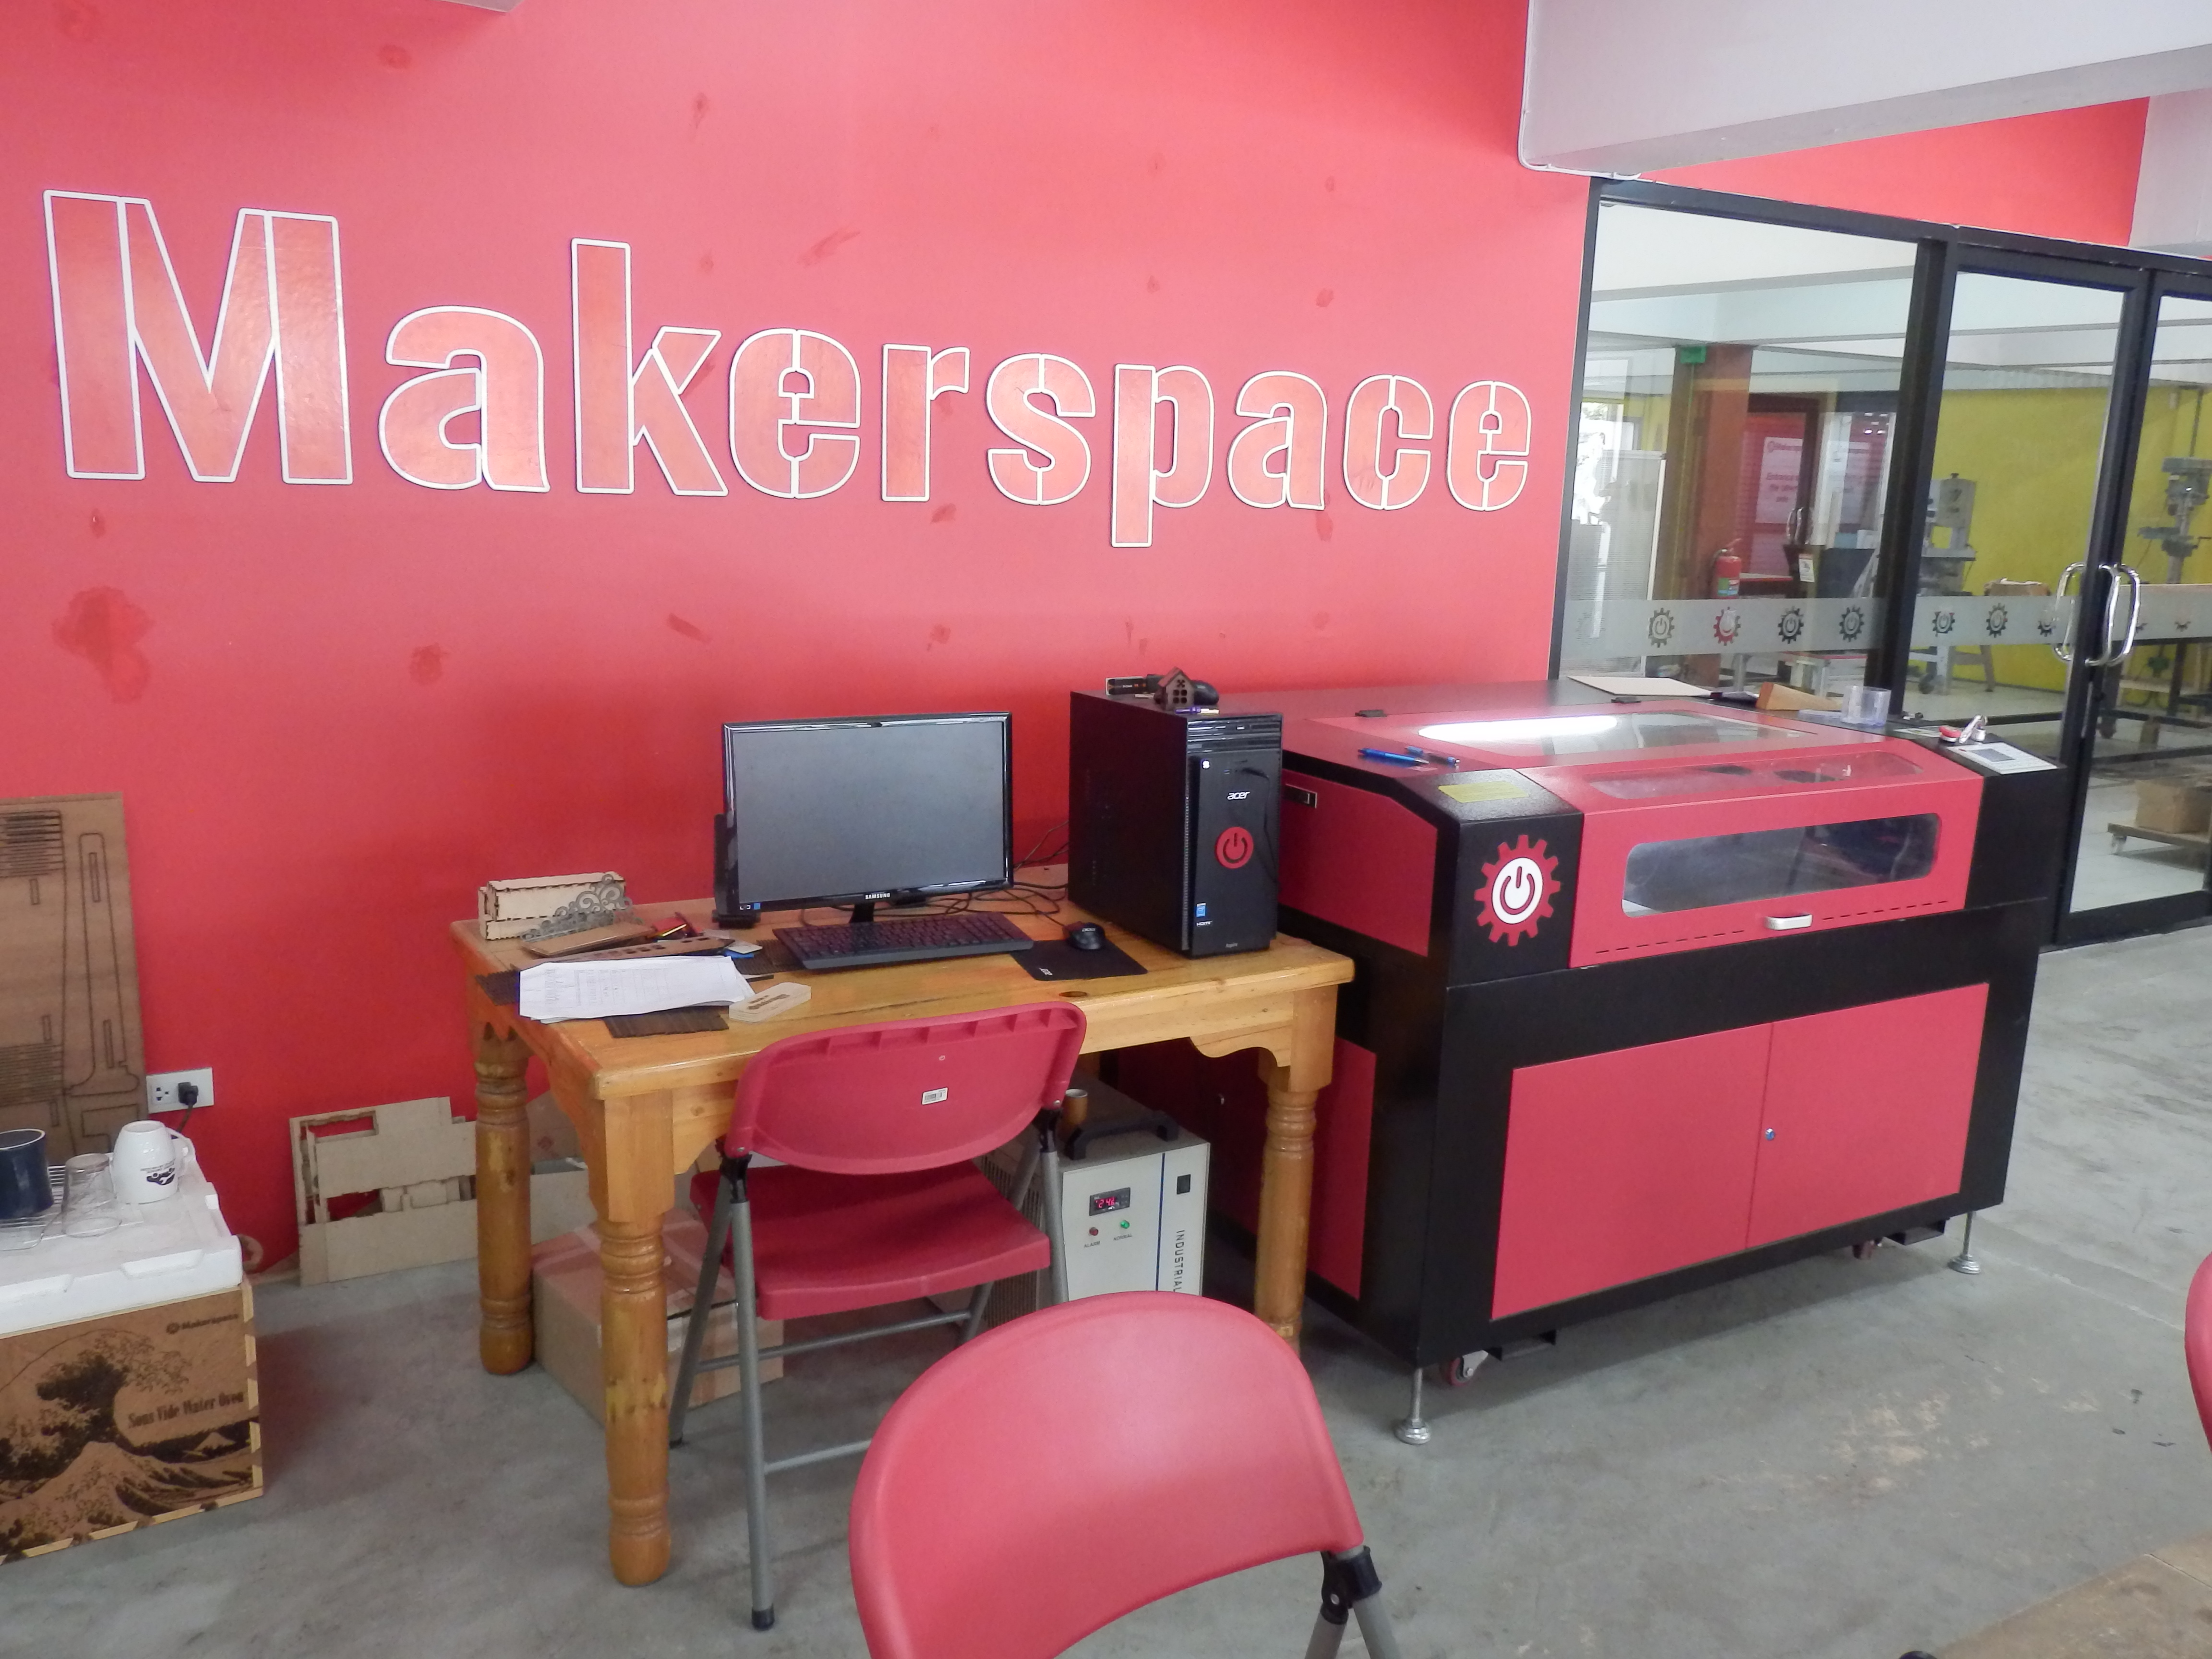 Makerspace Chiang Mai, Thailand